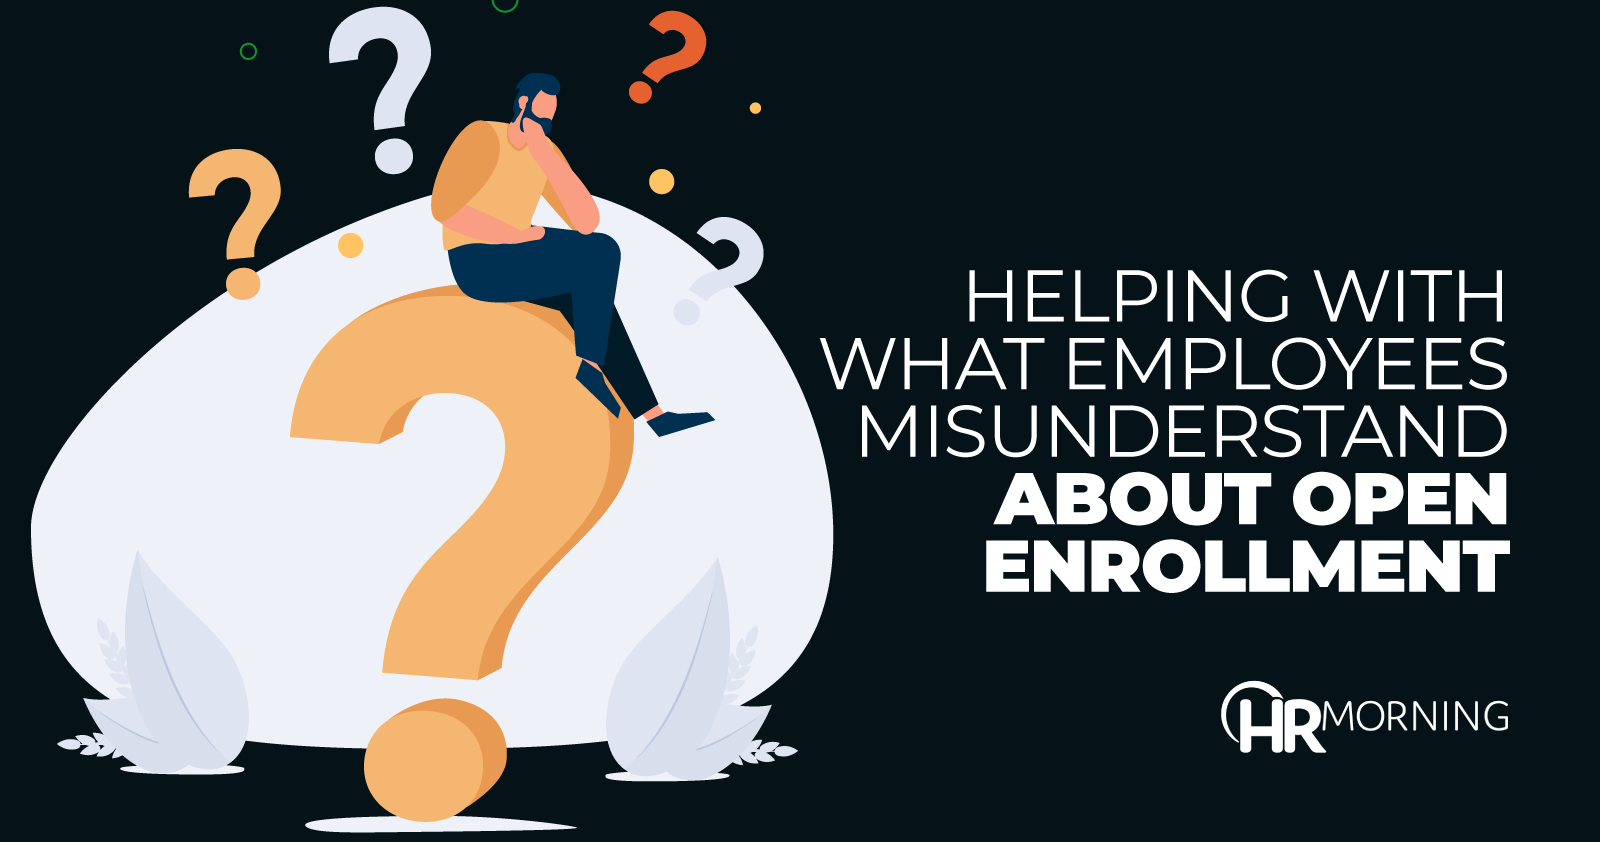 Helping With What Employees Misunderstand About Open Enrollment